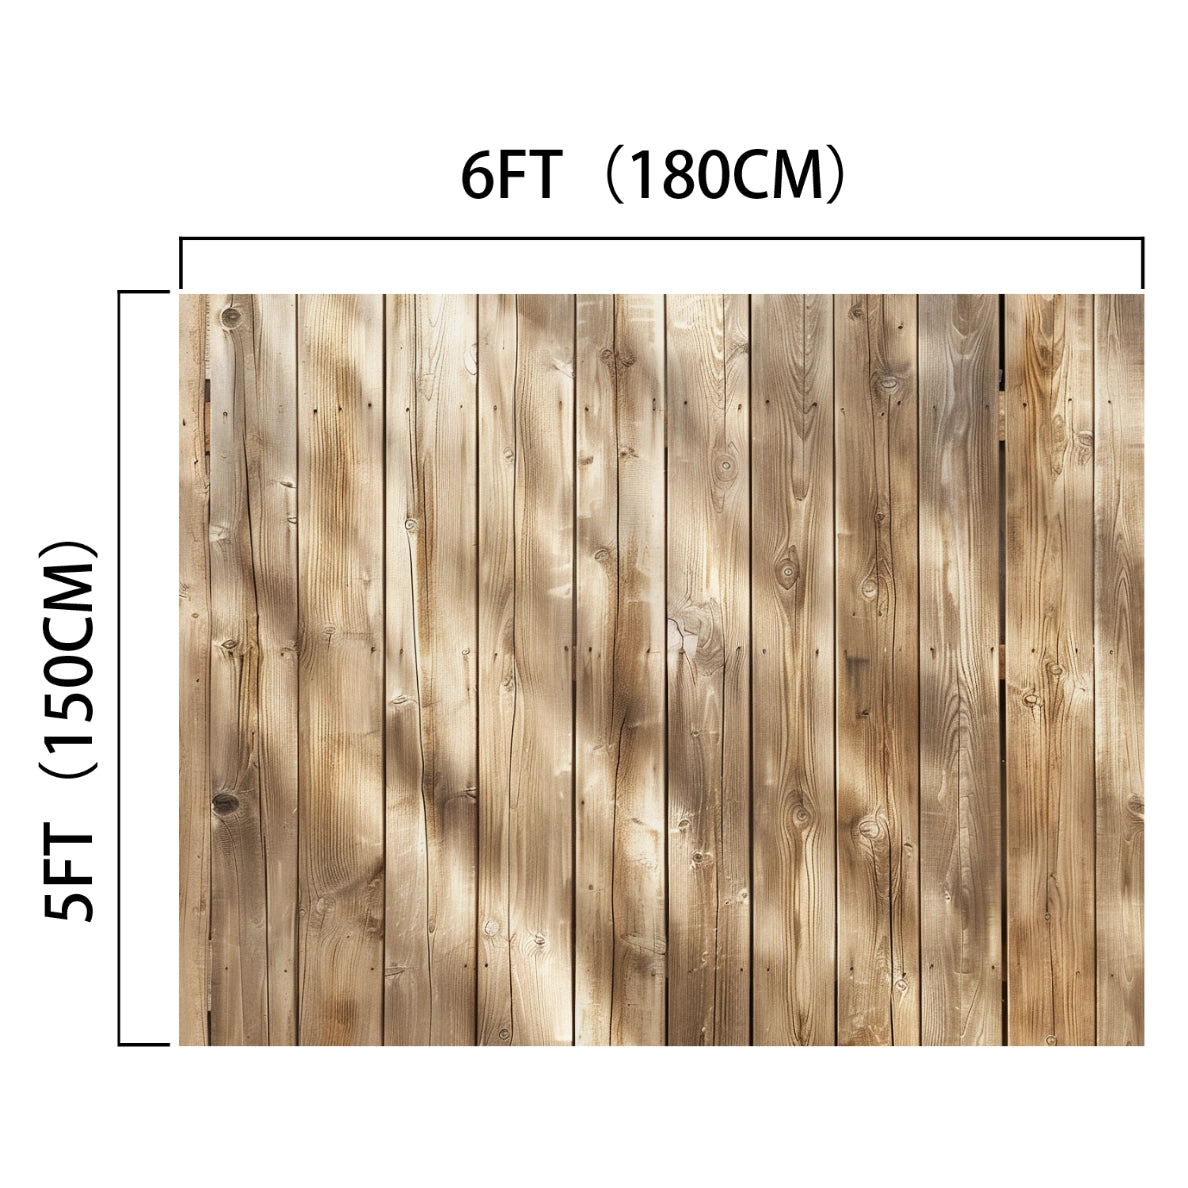 An ideasbackdrop Brown Wood Backdrops for Photography Vintage Brown Background Baby Shower Birthday Photo Booth Studio Props measuring 6 feet (180 cm) wide and 5 feet (150 cm) tall with horizontal wood planks, featuring high-resolution printing for detailed textures.